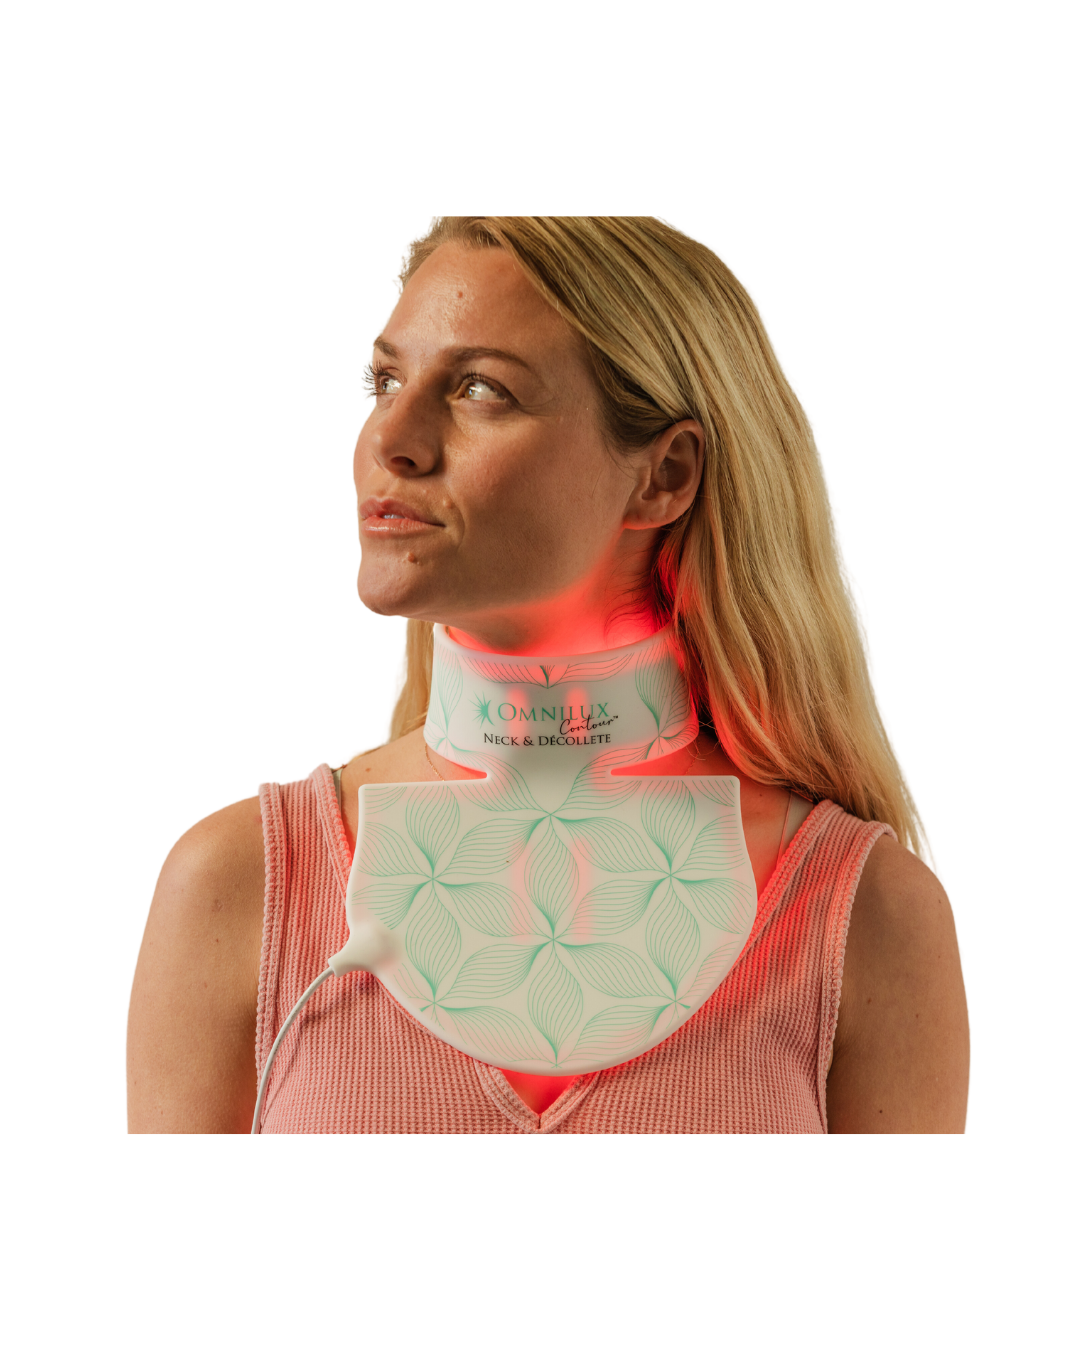 Omnilux Contour for Neck & Decollete LED Therapy Device